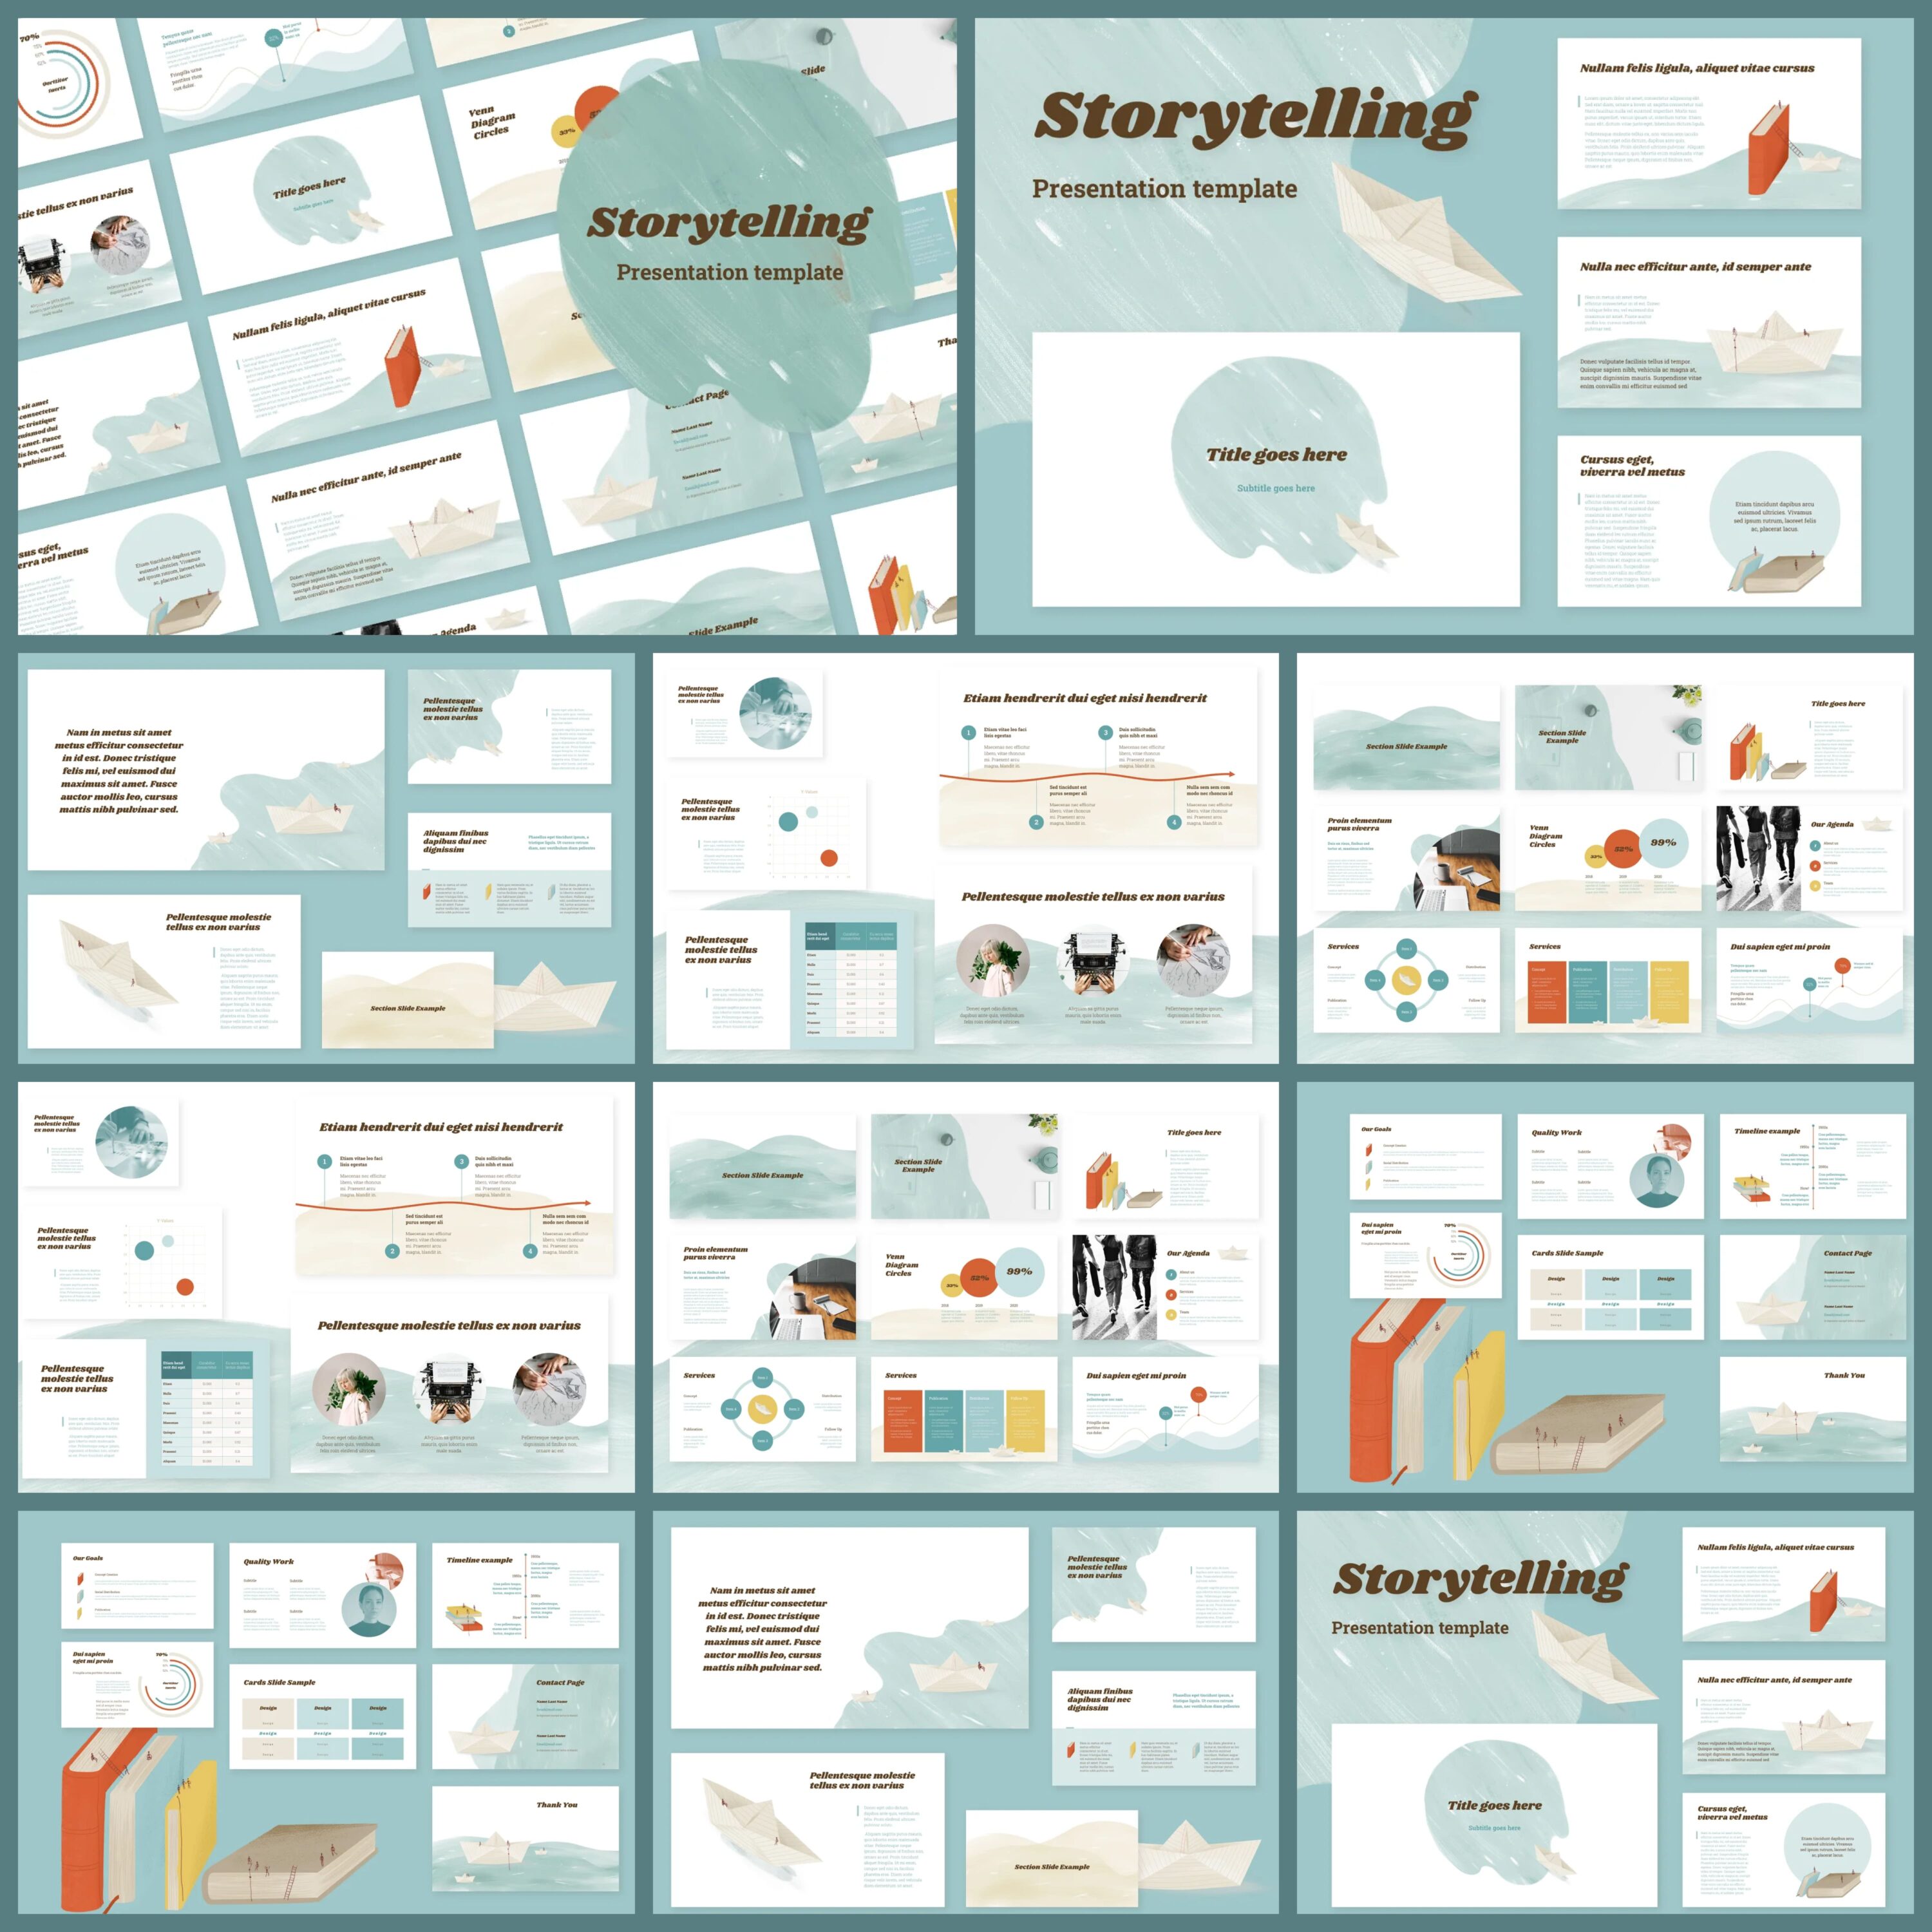 Storytelling - PowerPoint Template cover.